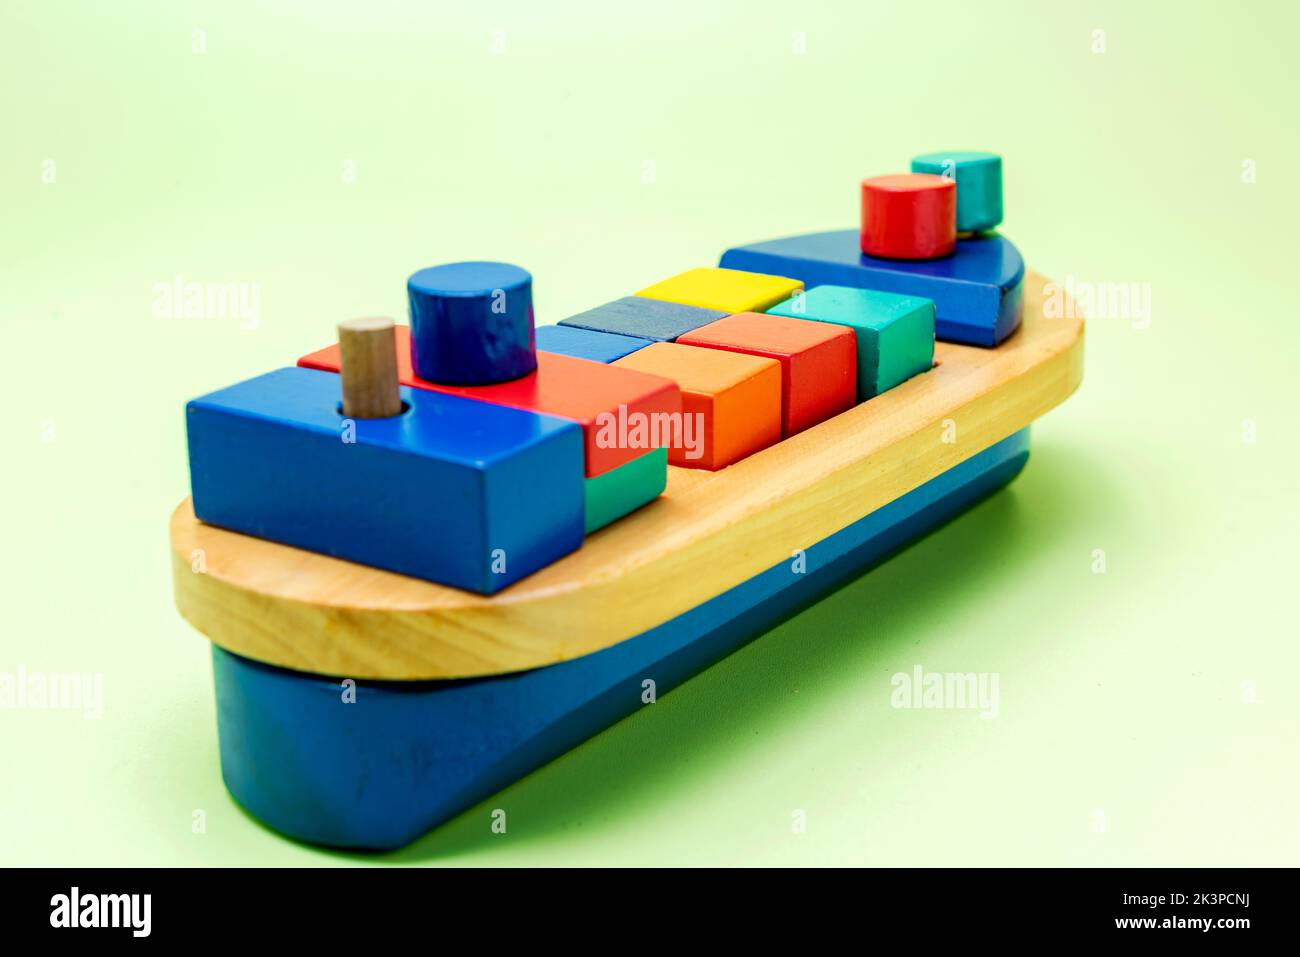 A colorful wooden toy ship on a colored background Stock Photo